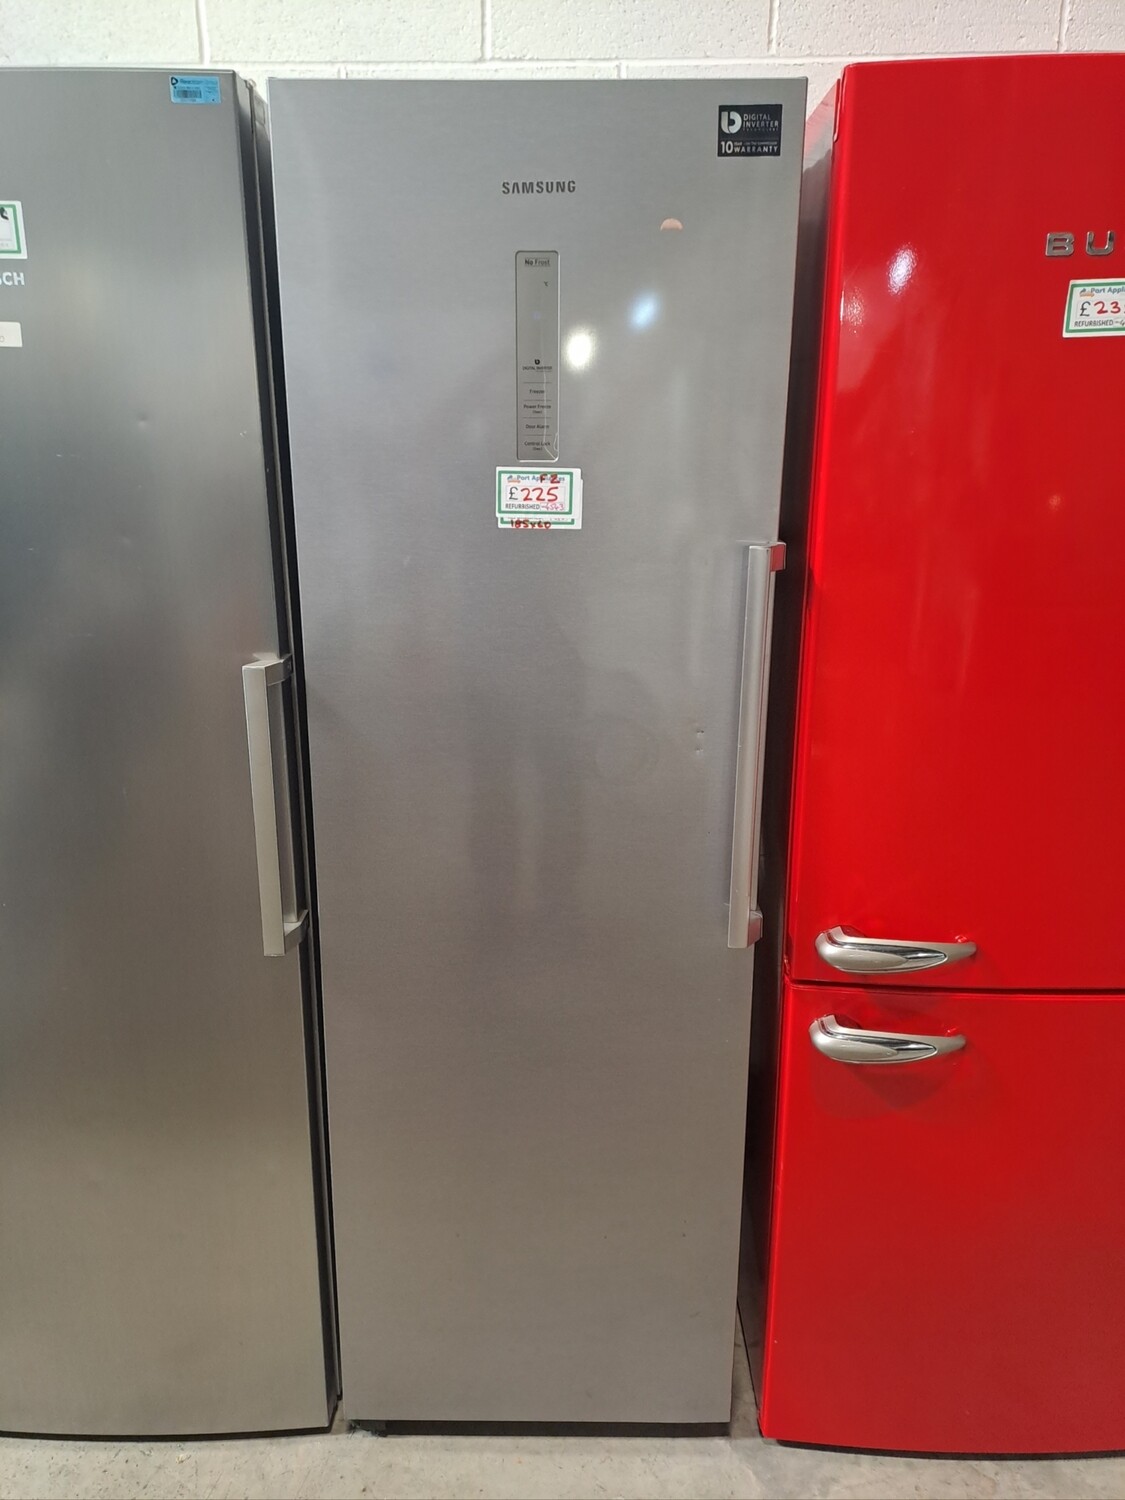 Samsung RZ32M7120SA Tall Freezer Stainless Silver H185 x W60 Refurbished 6 Month Guarantee